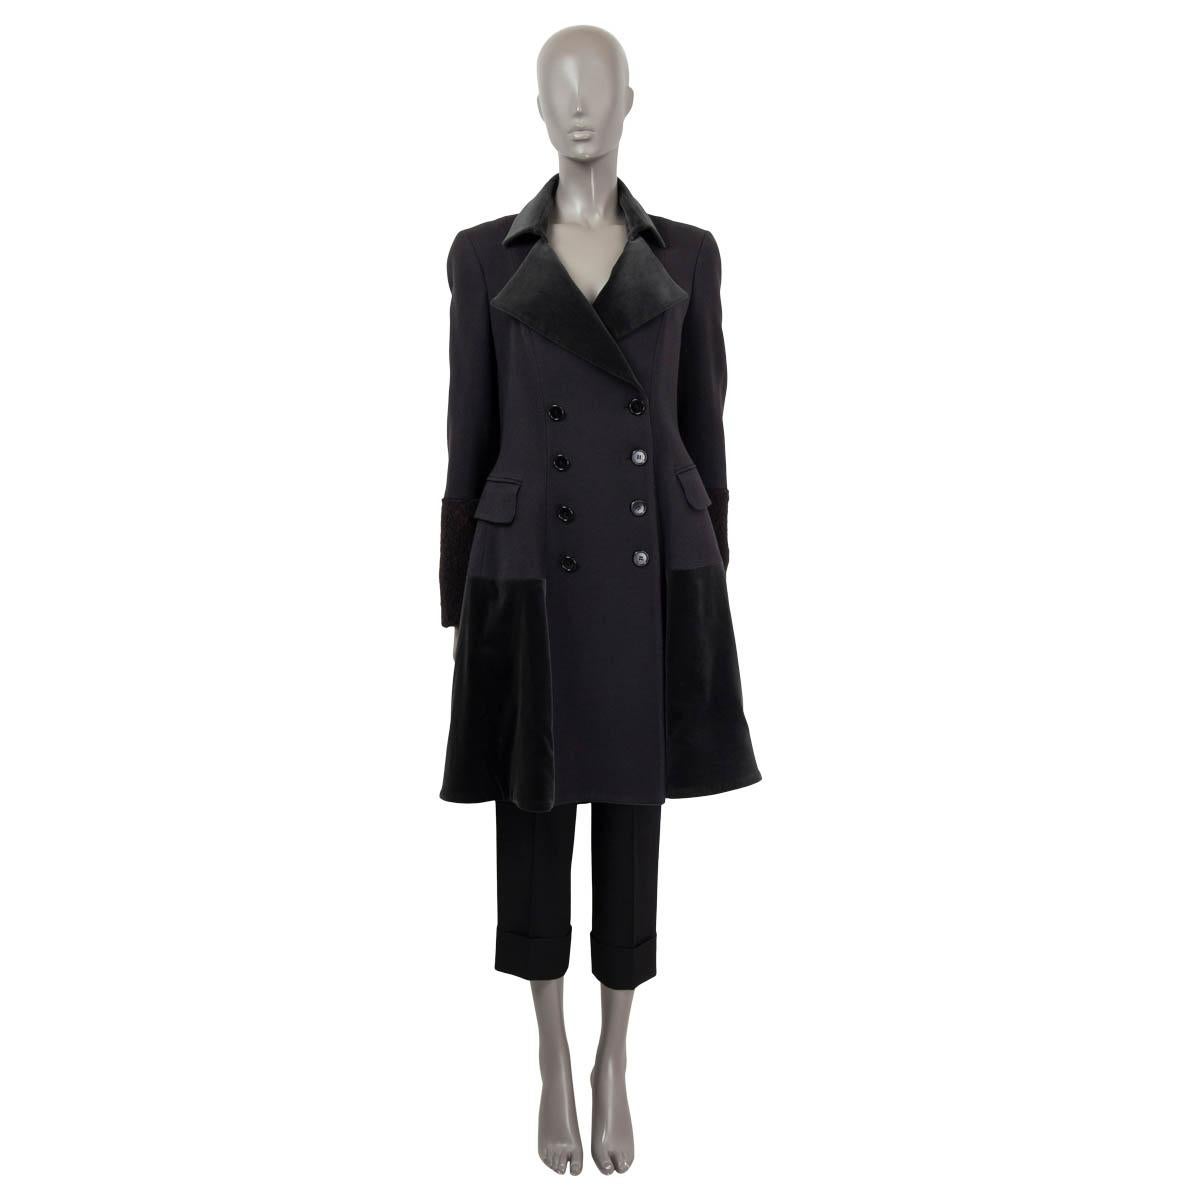 100% authentic Etro double-breasted coat in black and  gray-green wool (65%), cotton (21%), viscose (9%) and alpaca (5%). Features velvet inserts and alpaca on the sleeves and two flap pockets. Closes with buttons on the front. Lined in gray-green